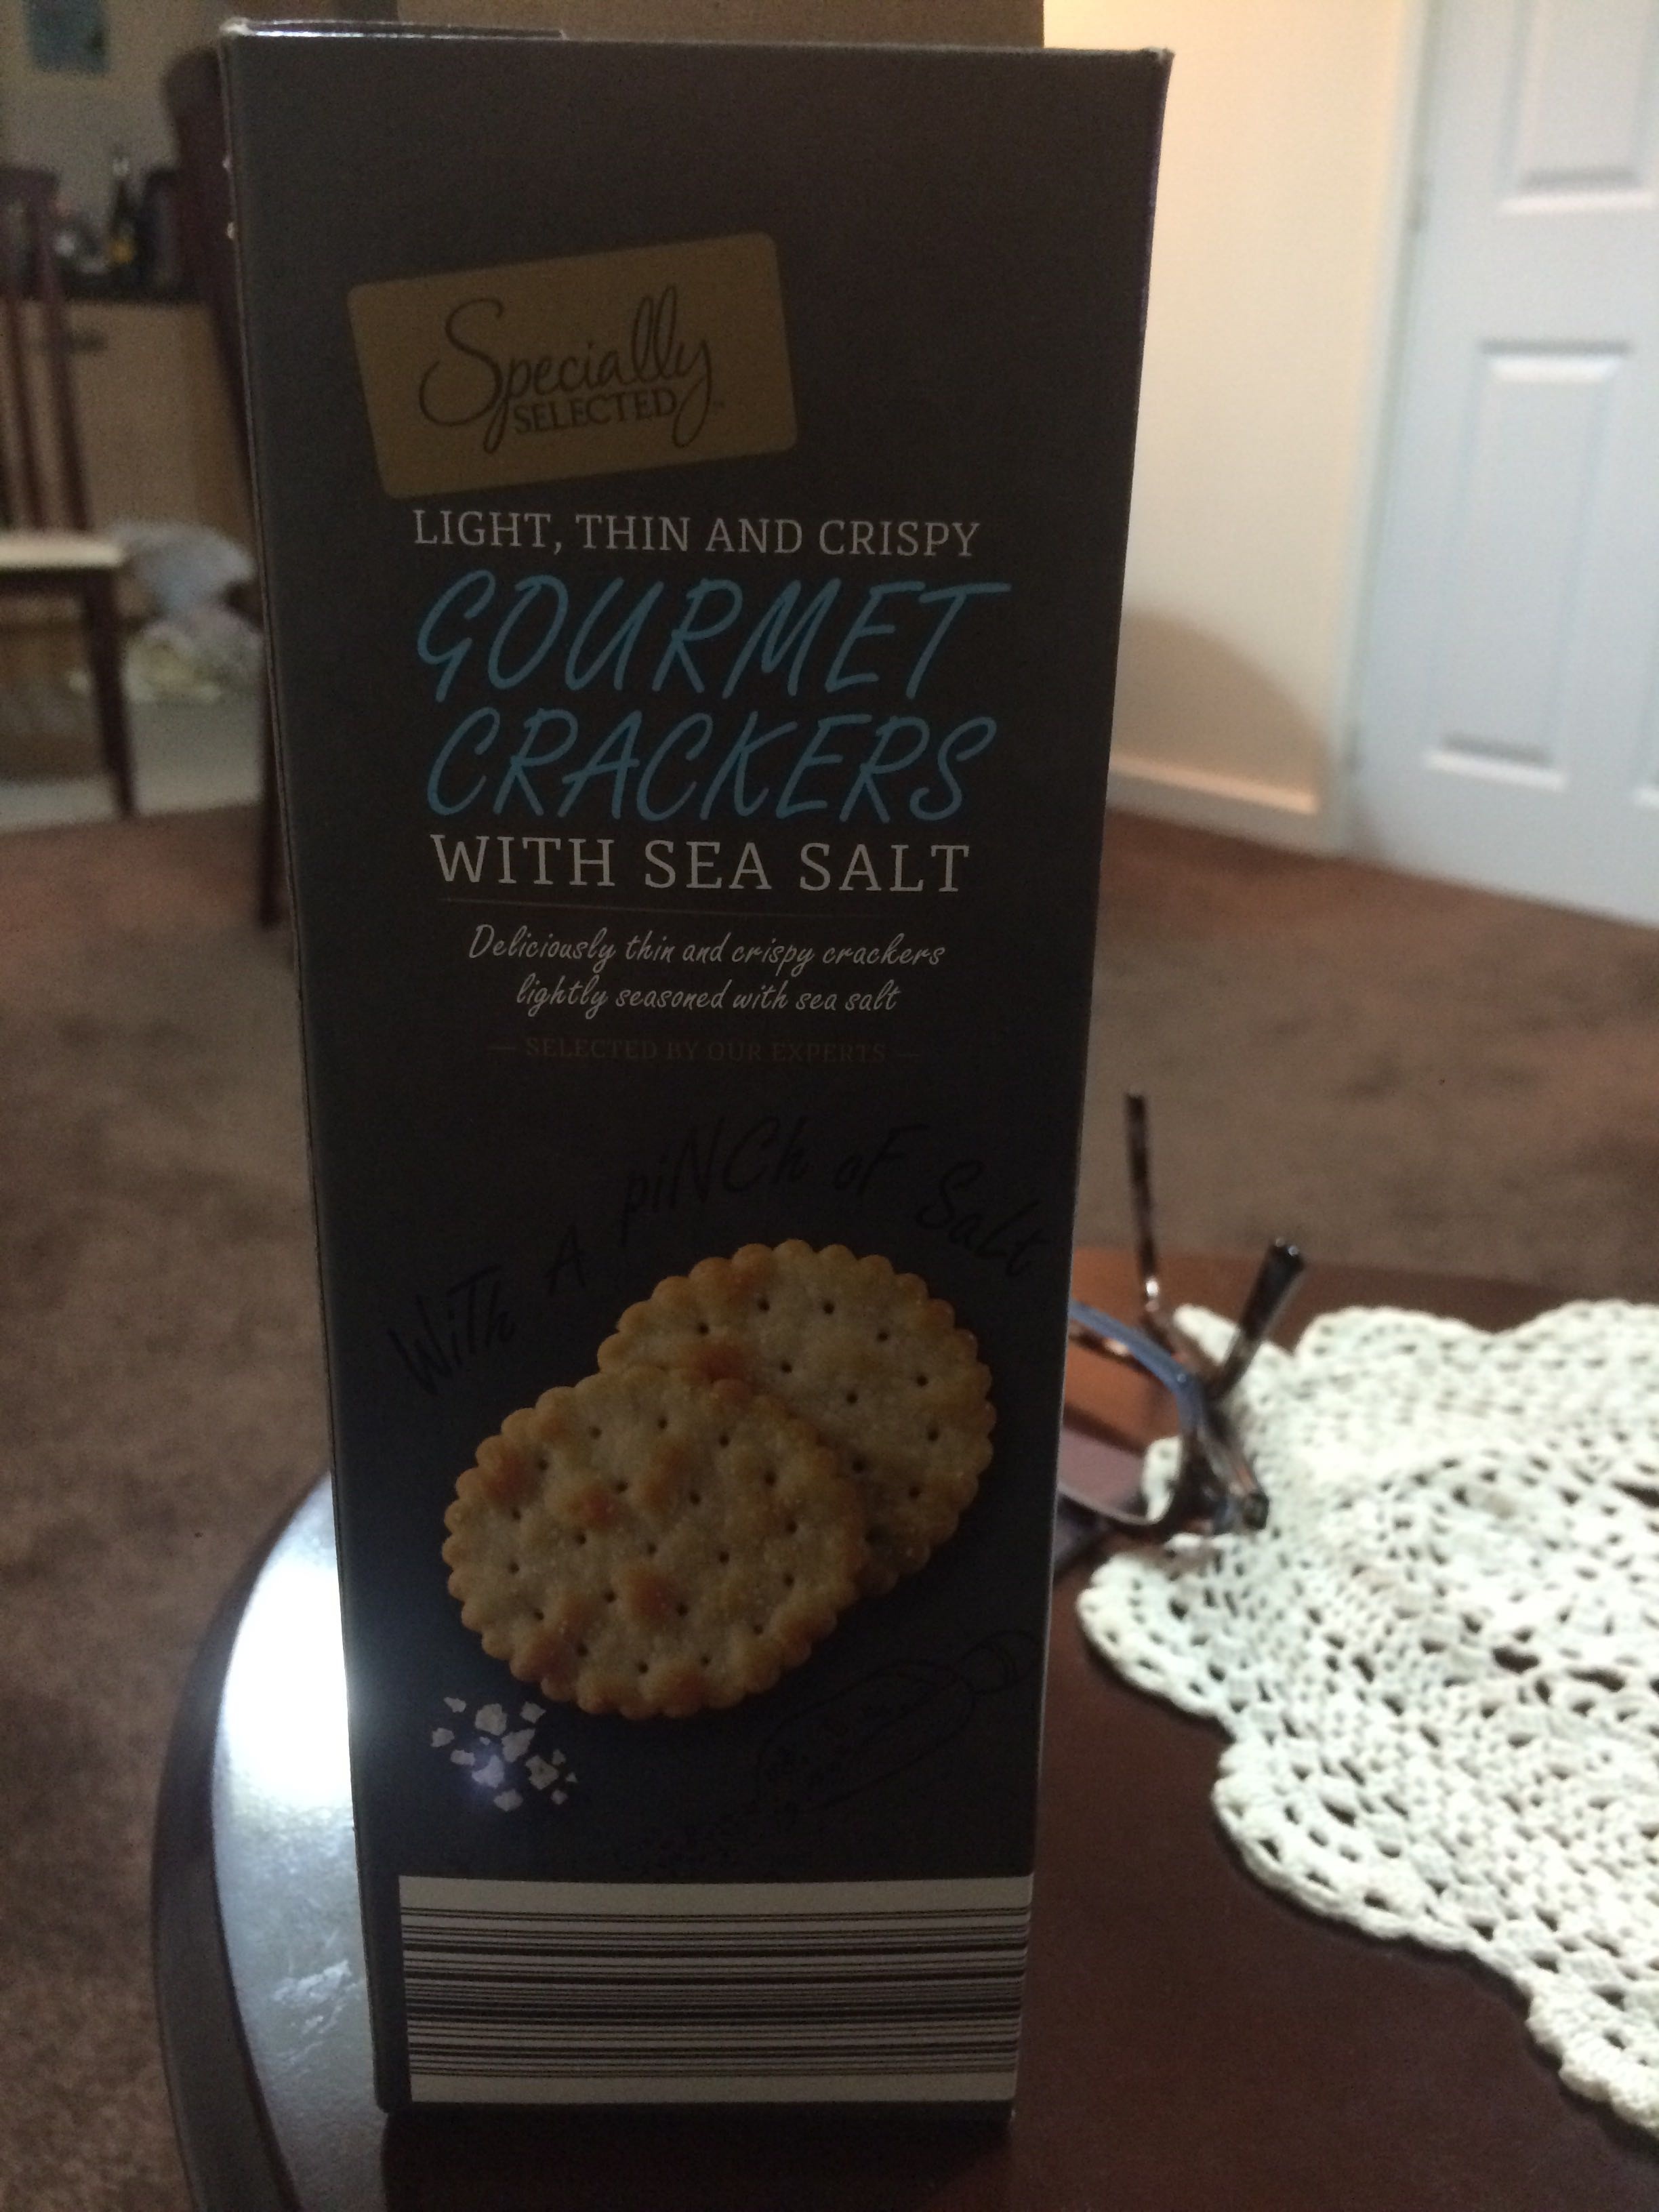 Gourmet crackers with sea salt - Product